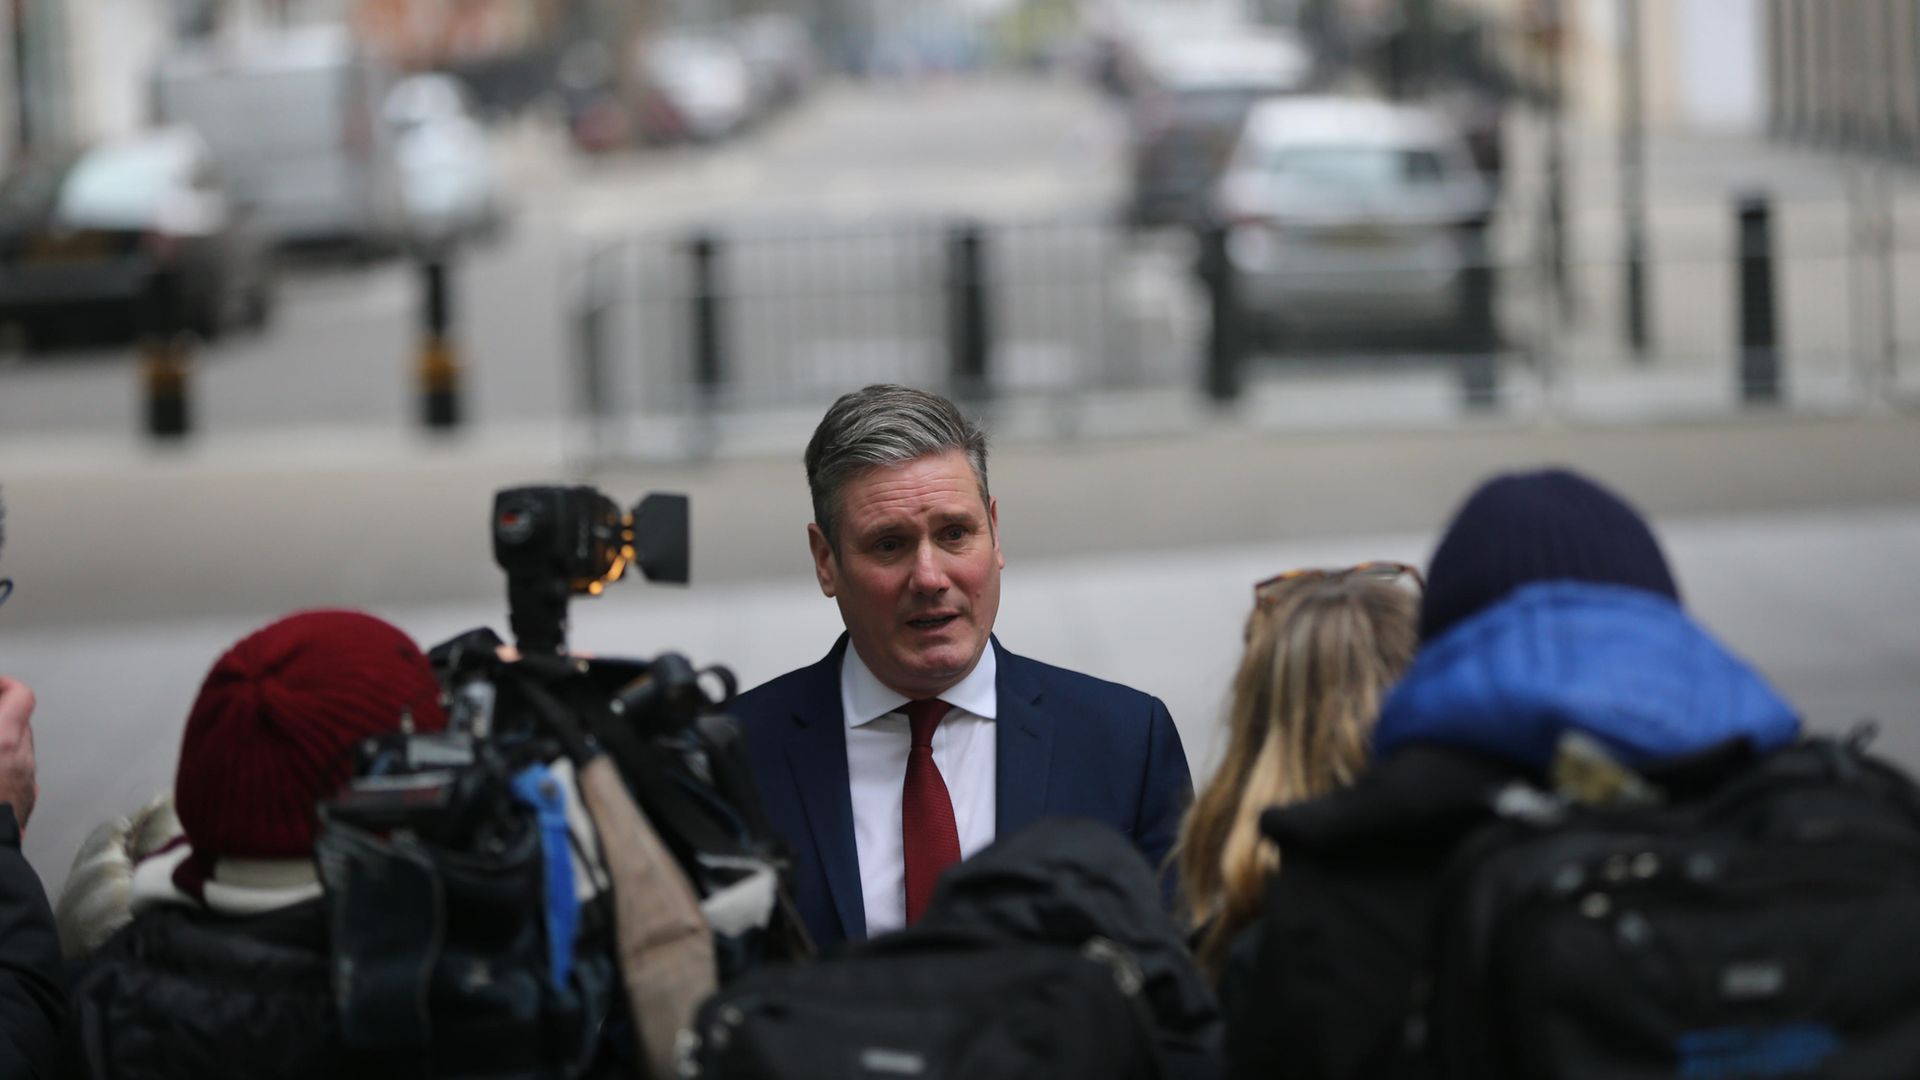 Keir Starmer leaves the BBC headquarters in London, on January 10 - Credit: Anadolu Agency via Getty Images